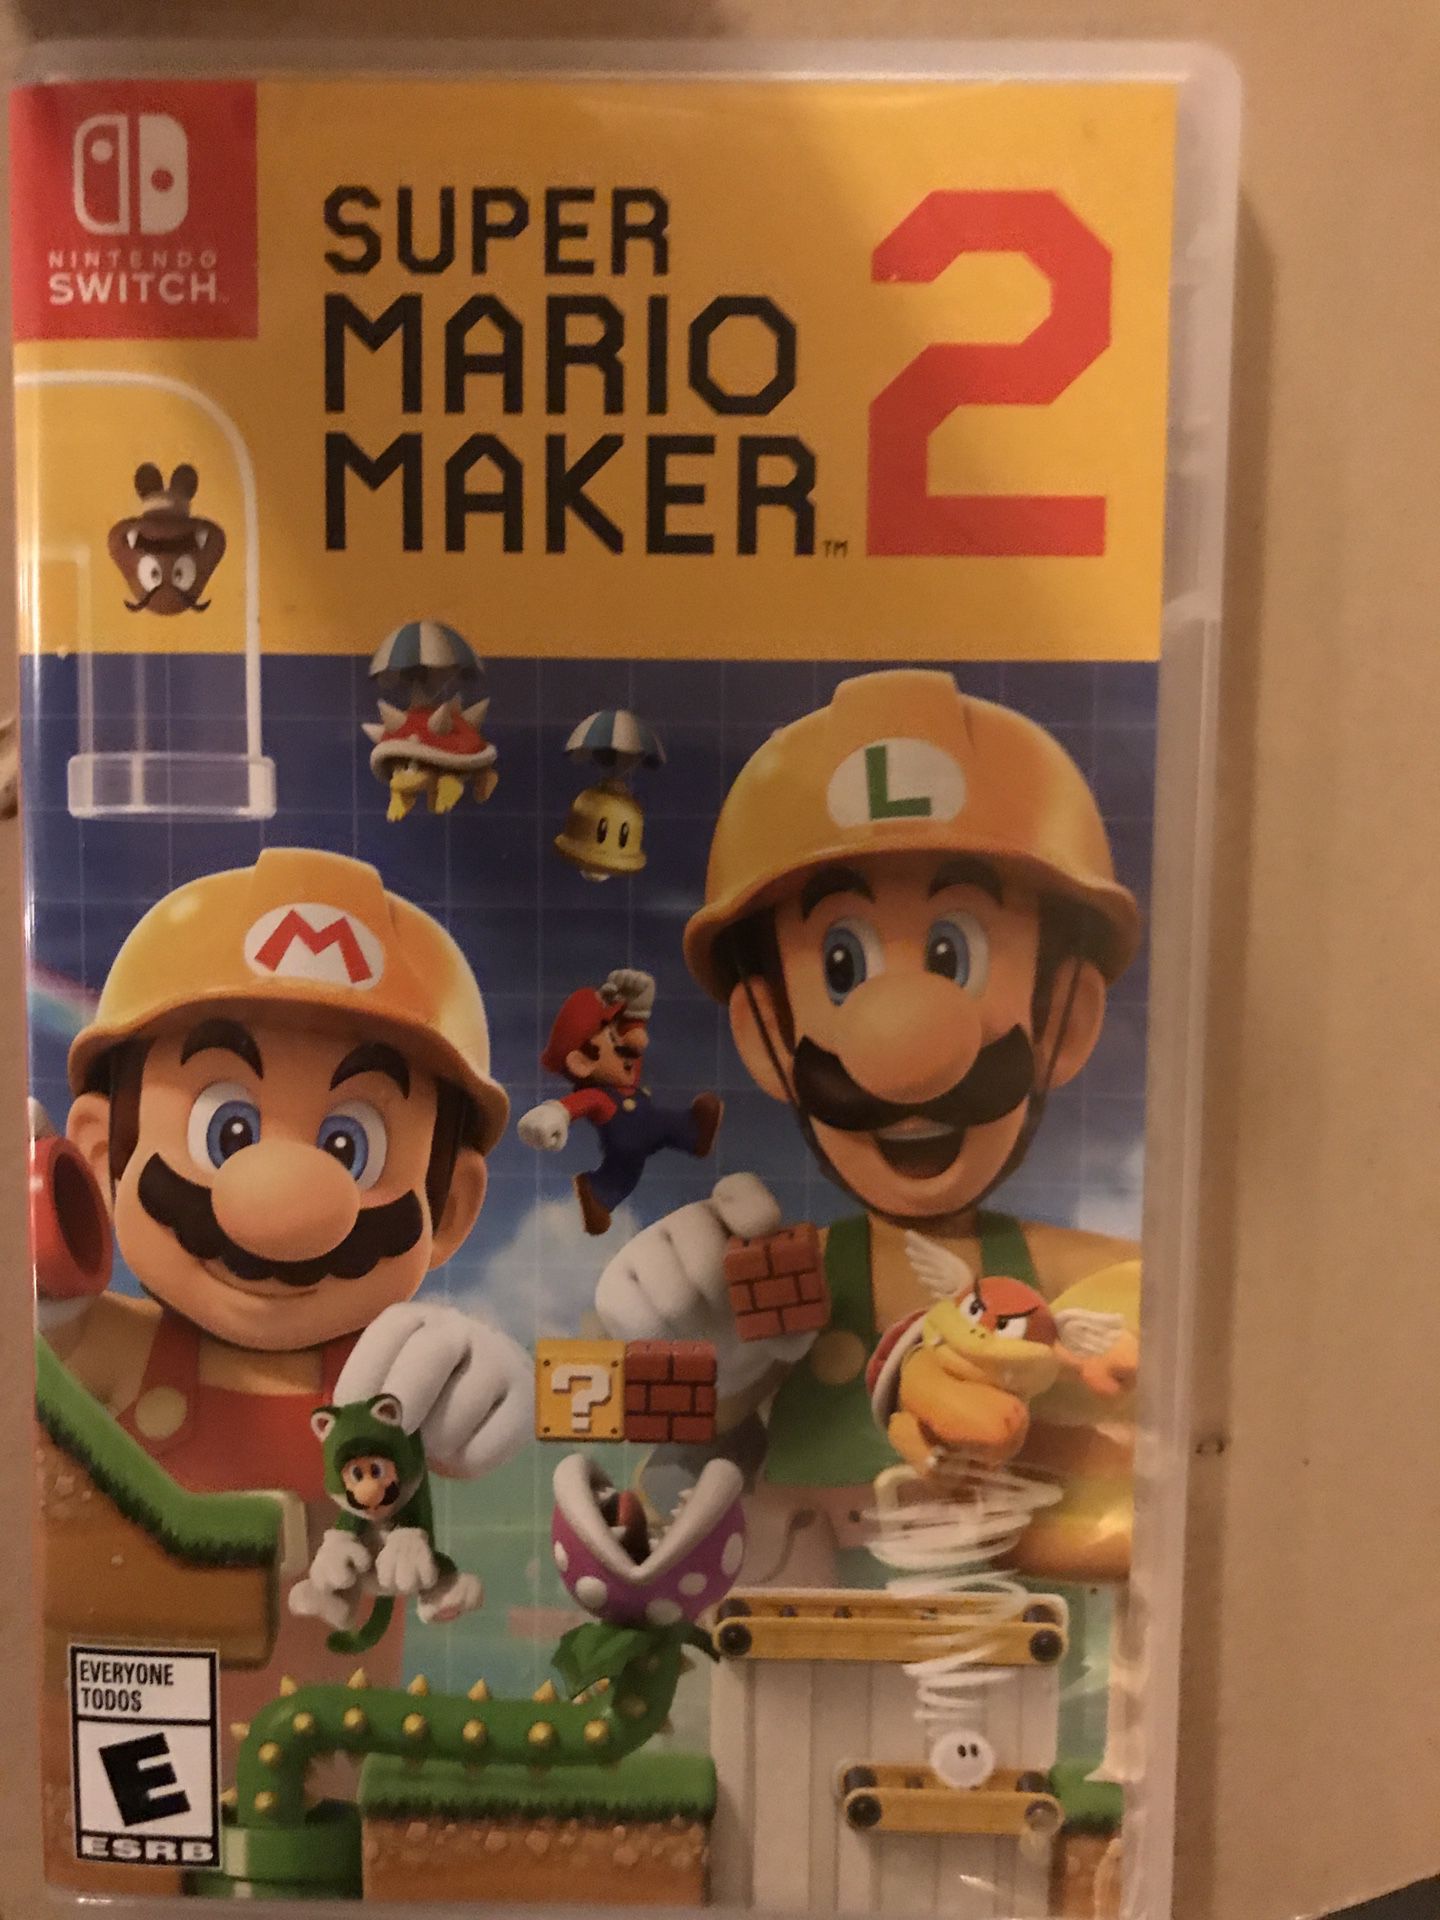 Super Mario maker 2 pay for the game $59 least can do $30